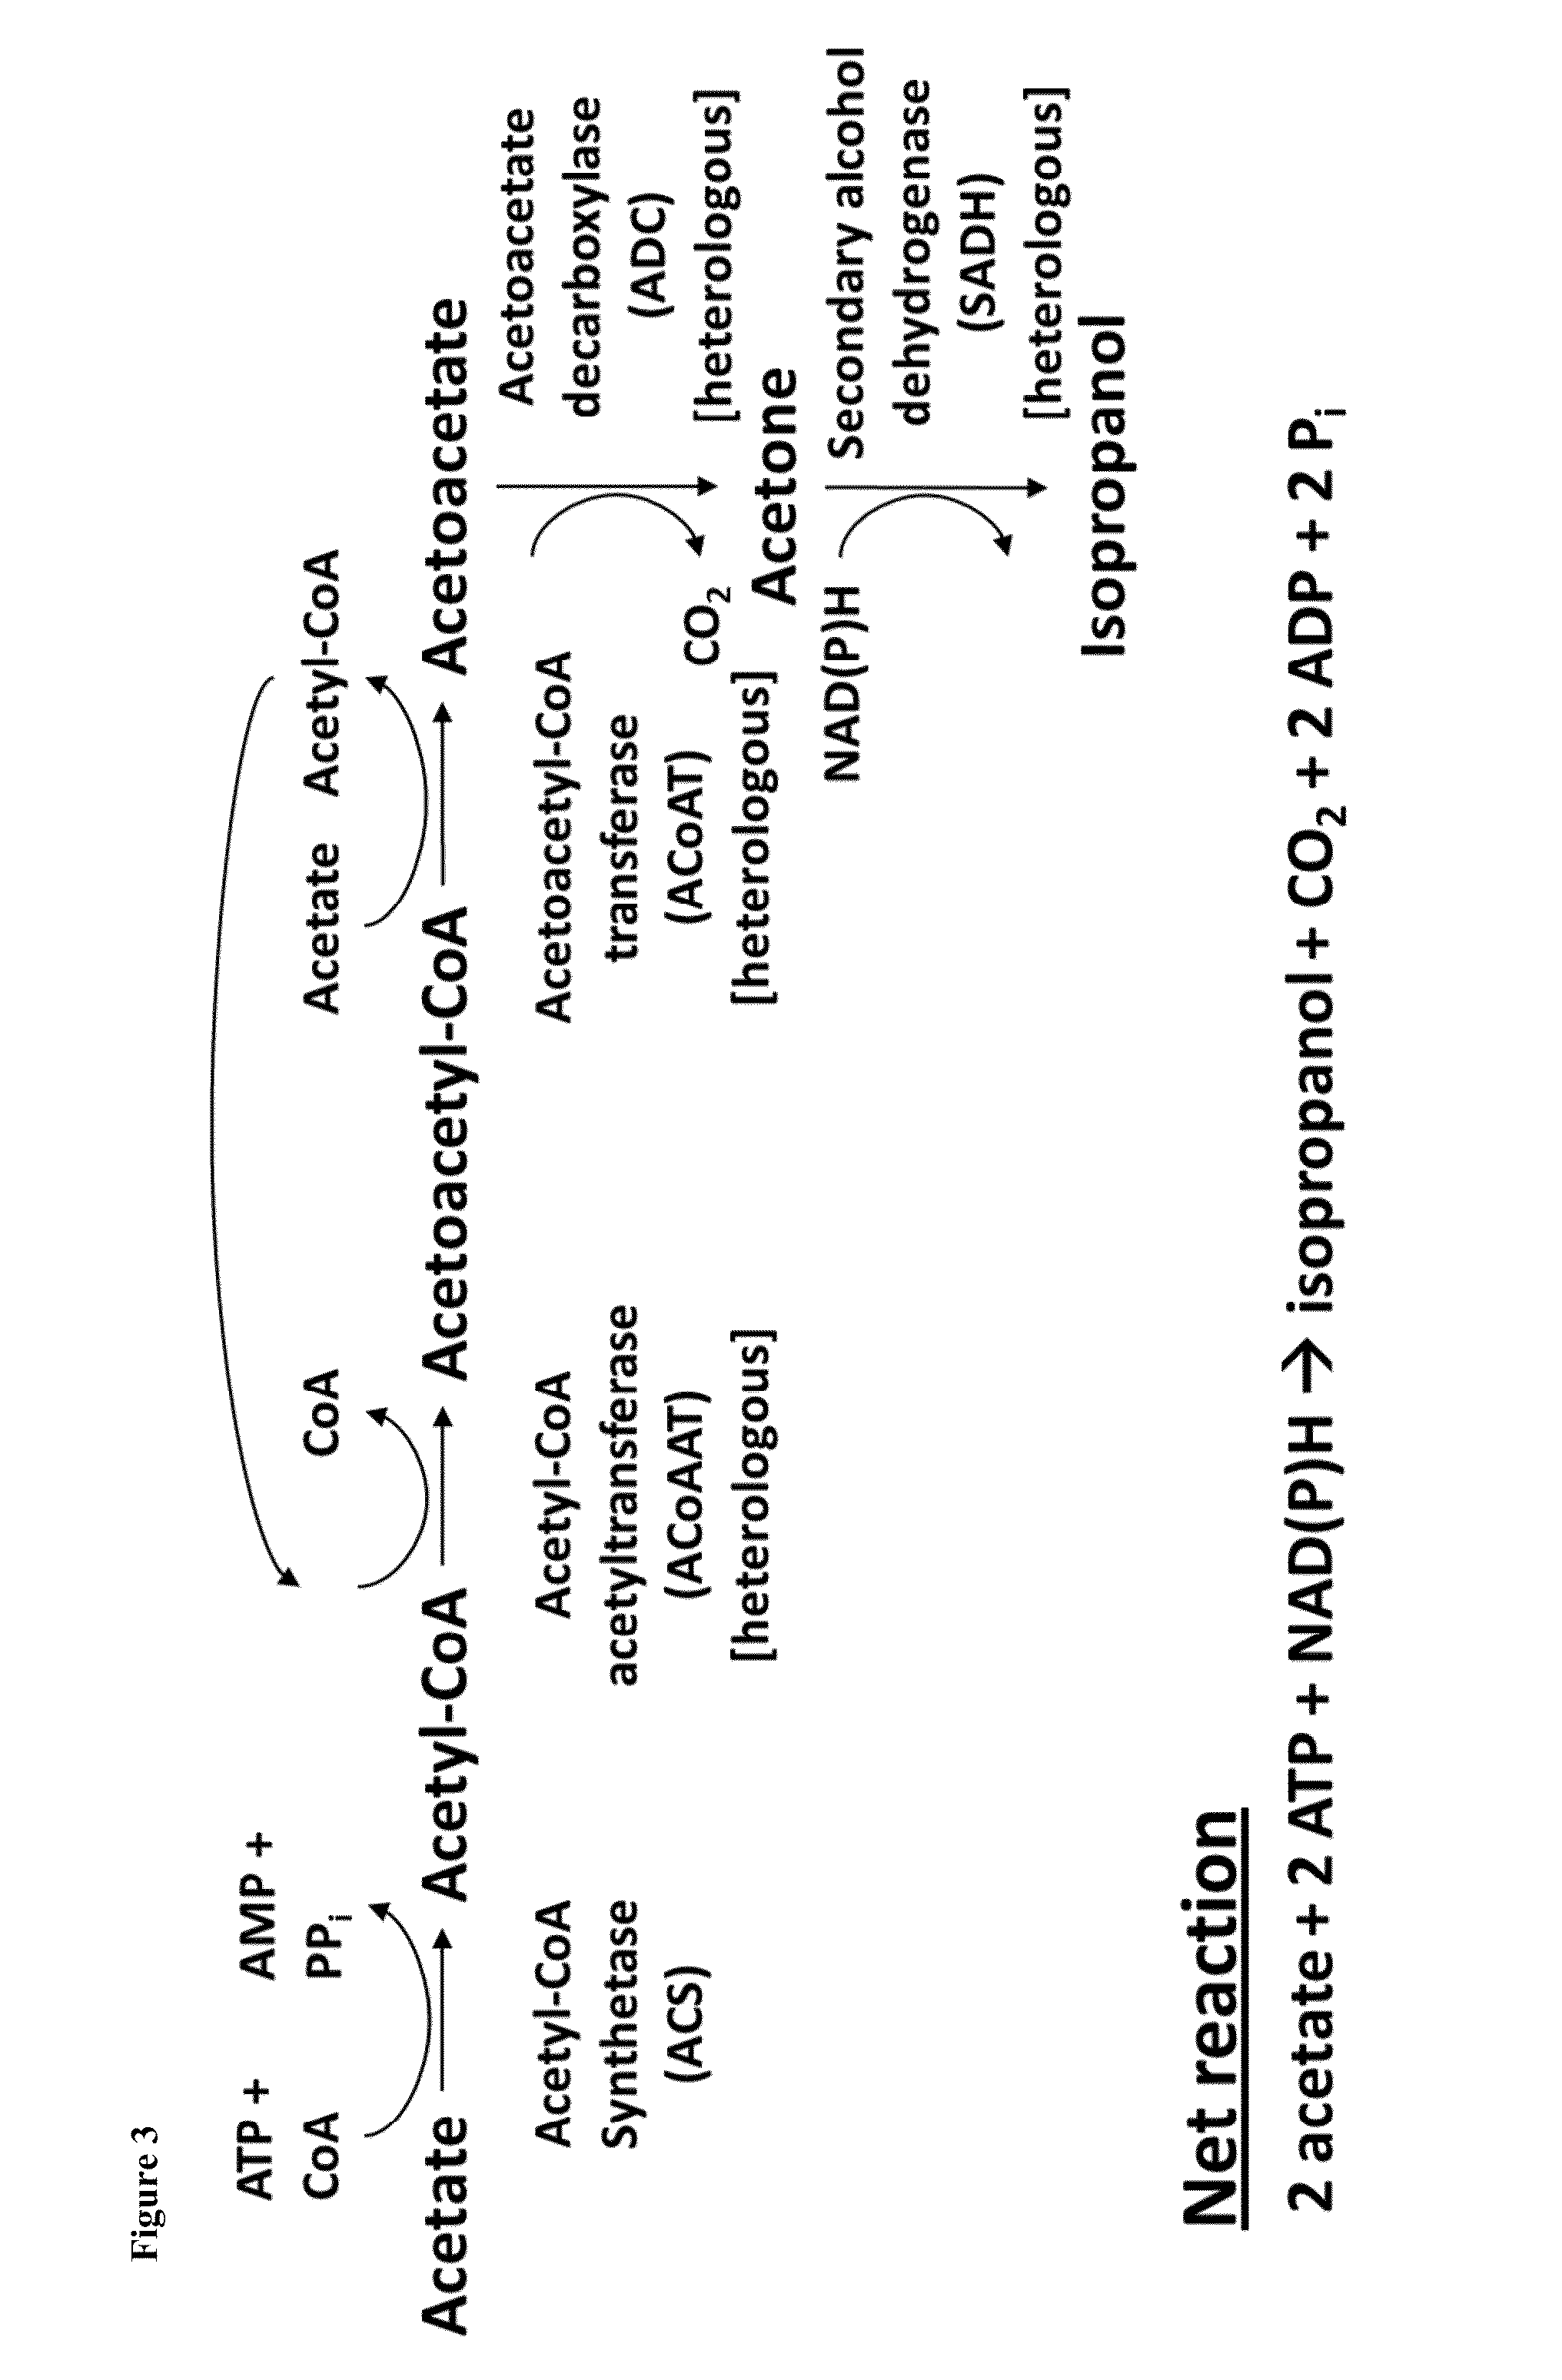 Method for Acetate Consumption During Ethanolic Fermentaion of Cellulosic Feedstocks